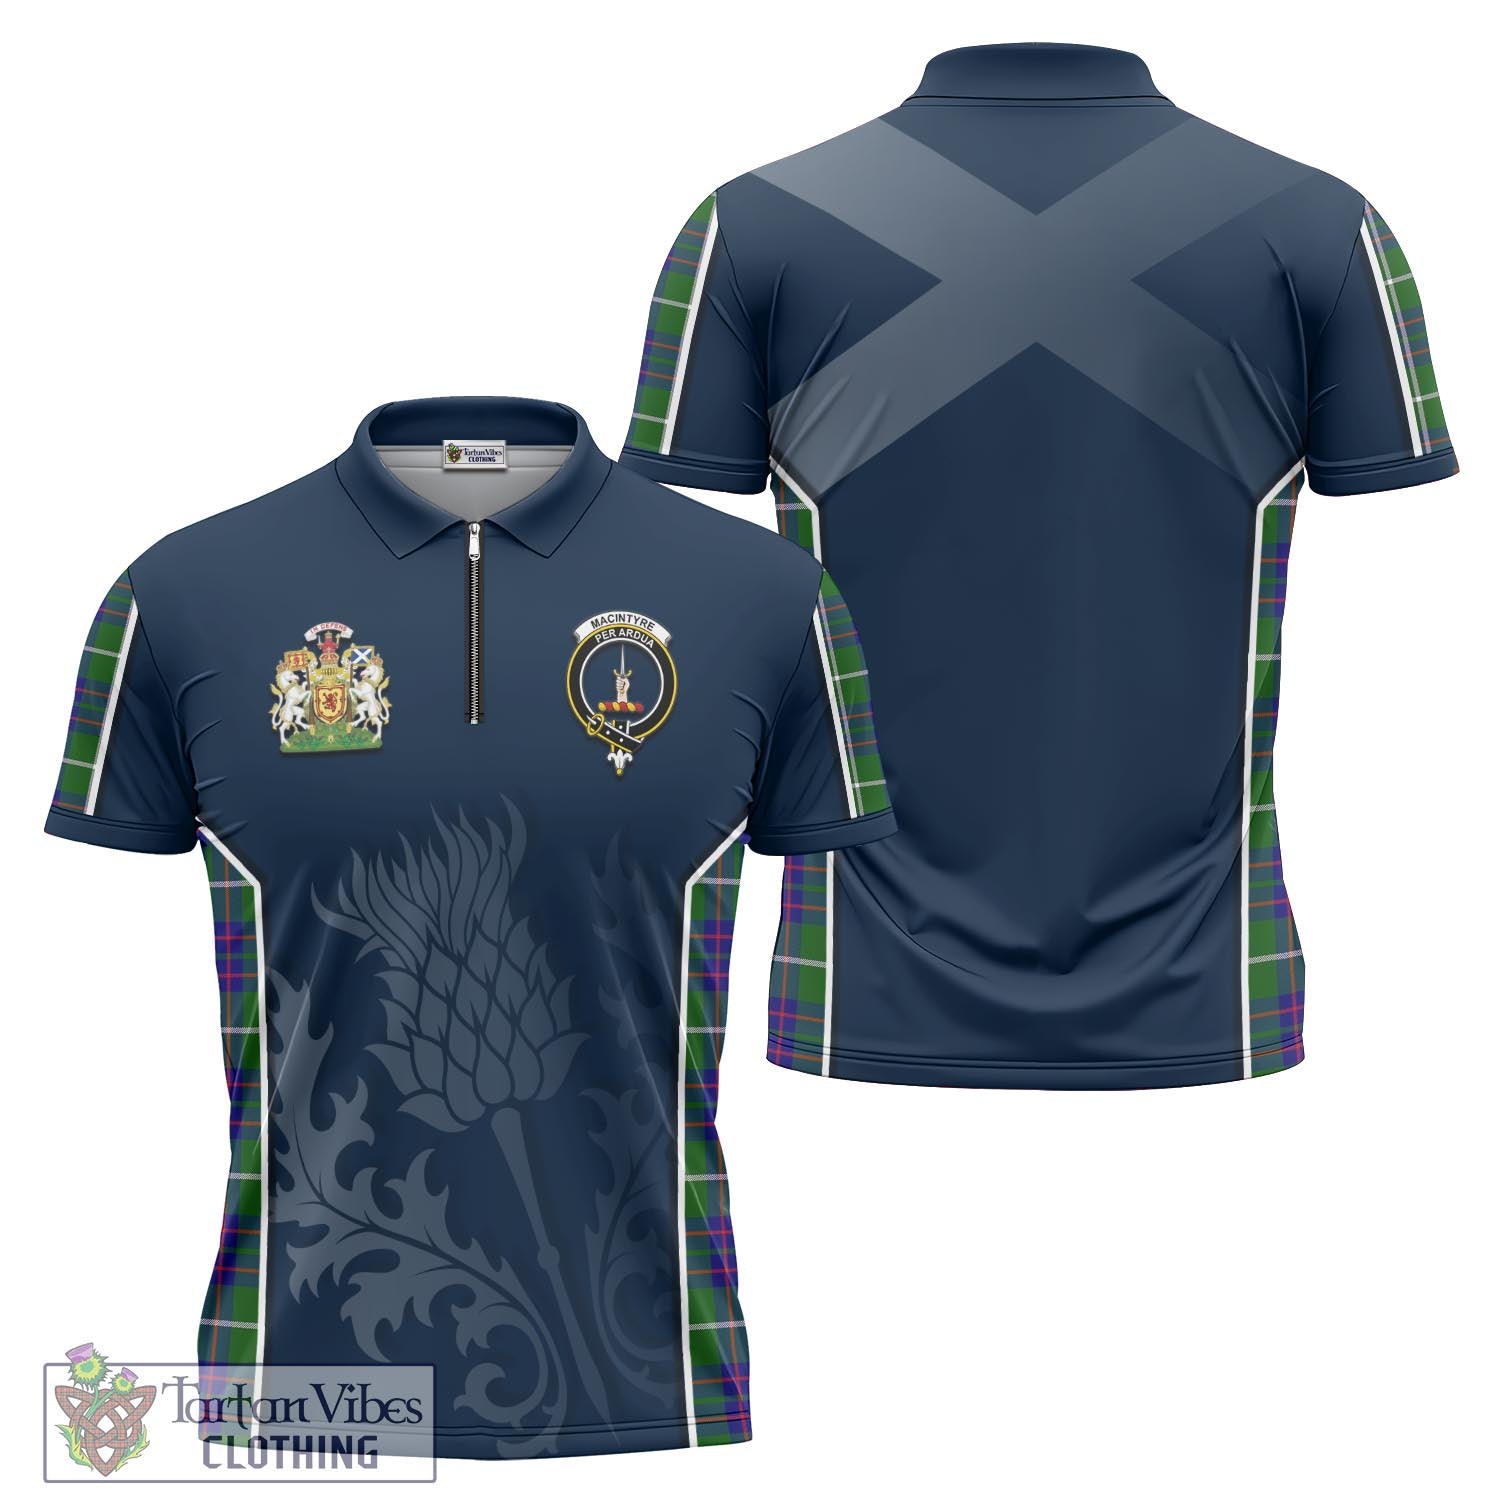 Tartan Vibes Clothing MacIntyre Hunting Modern Tartan Zipper Polo Shirt with Family Crest and Scottish Thistle Vibes Sport Style